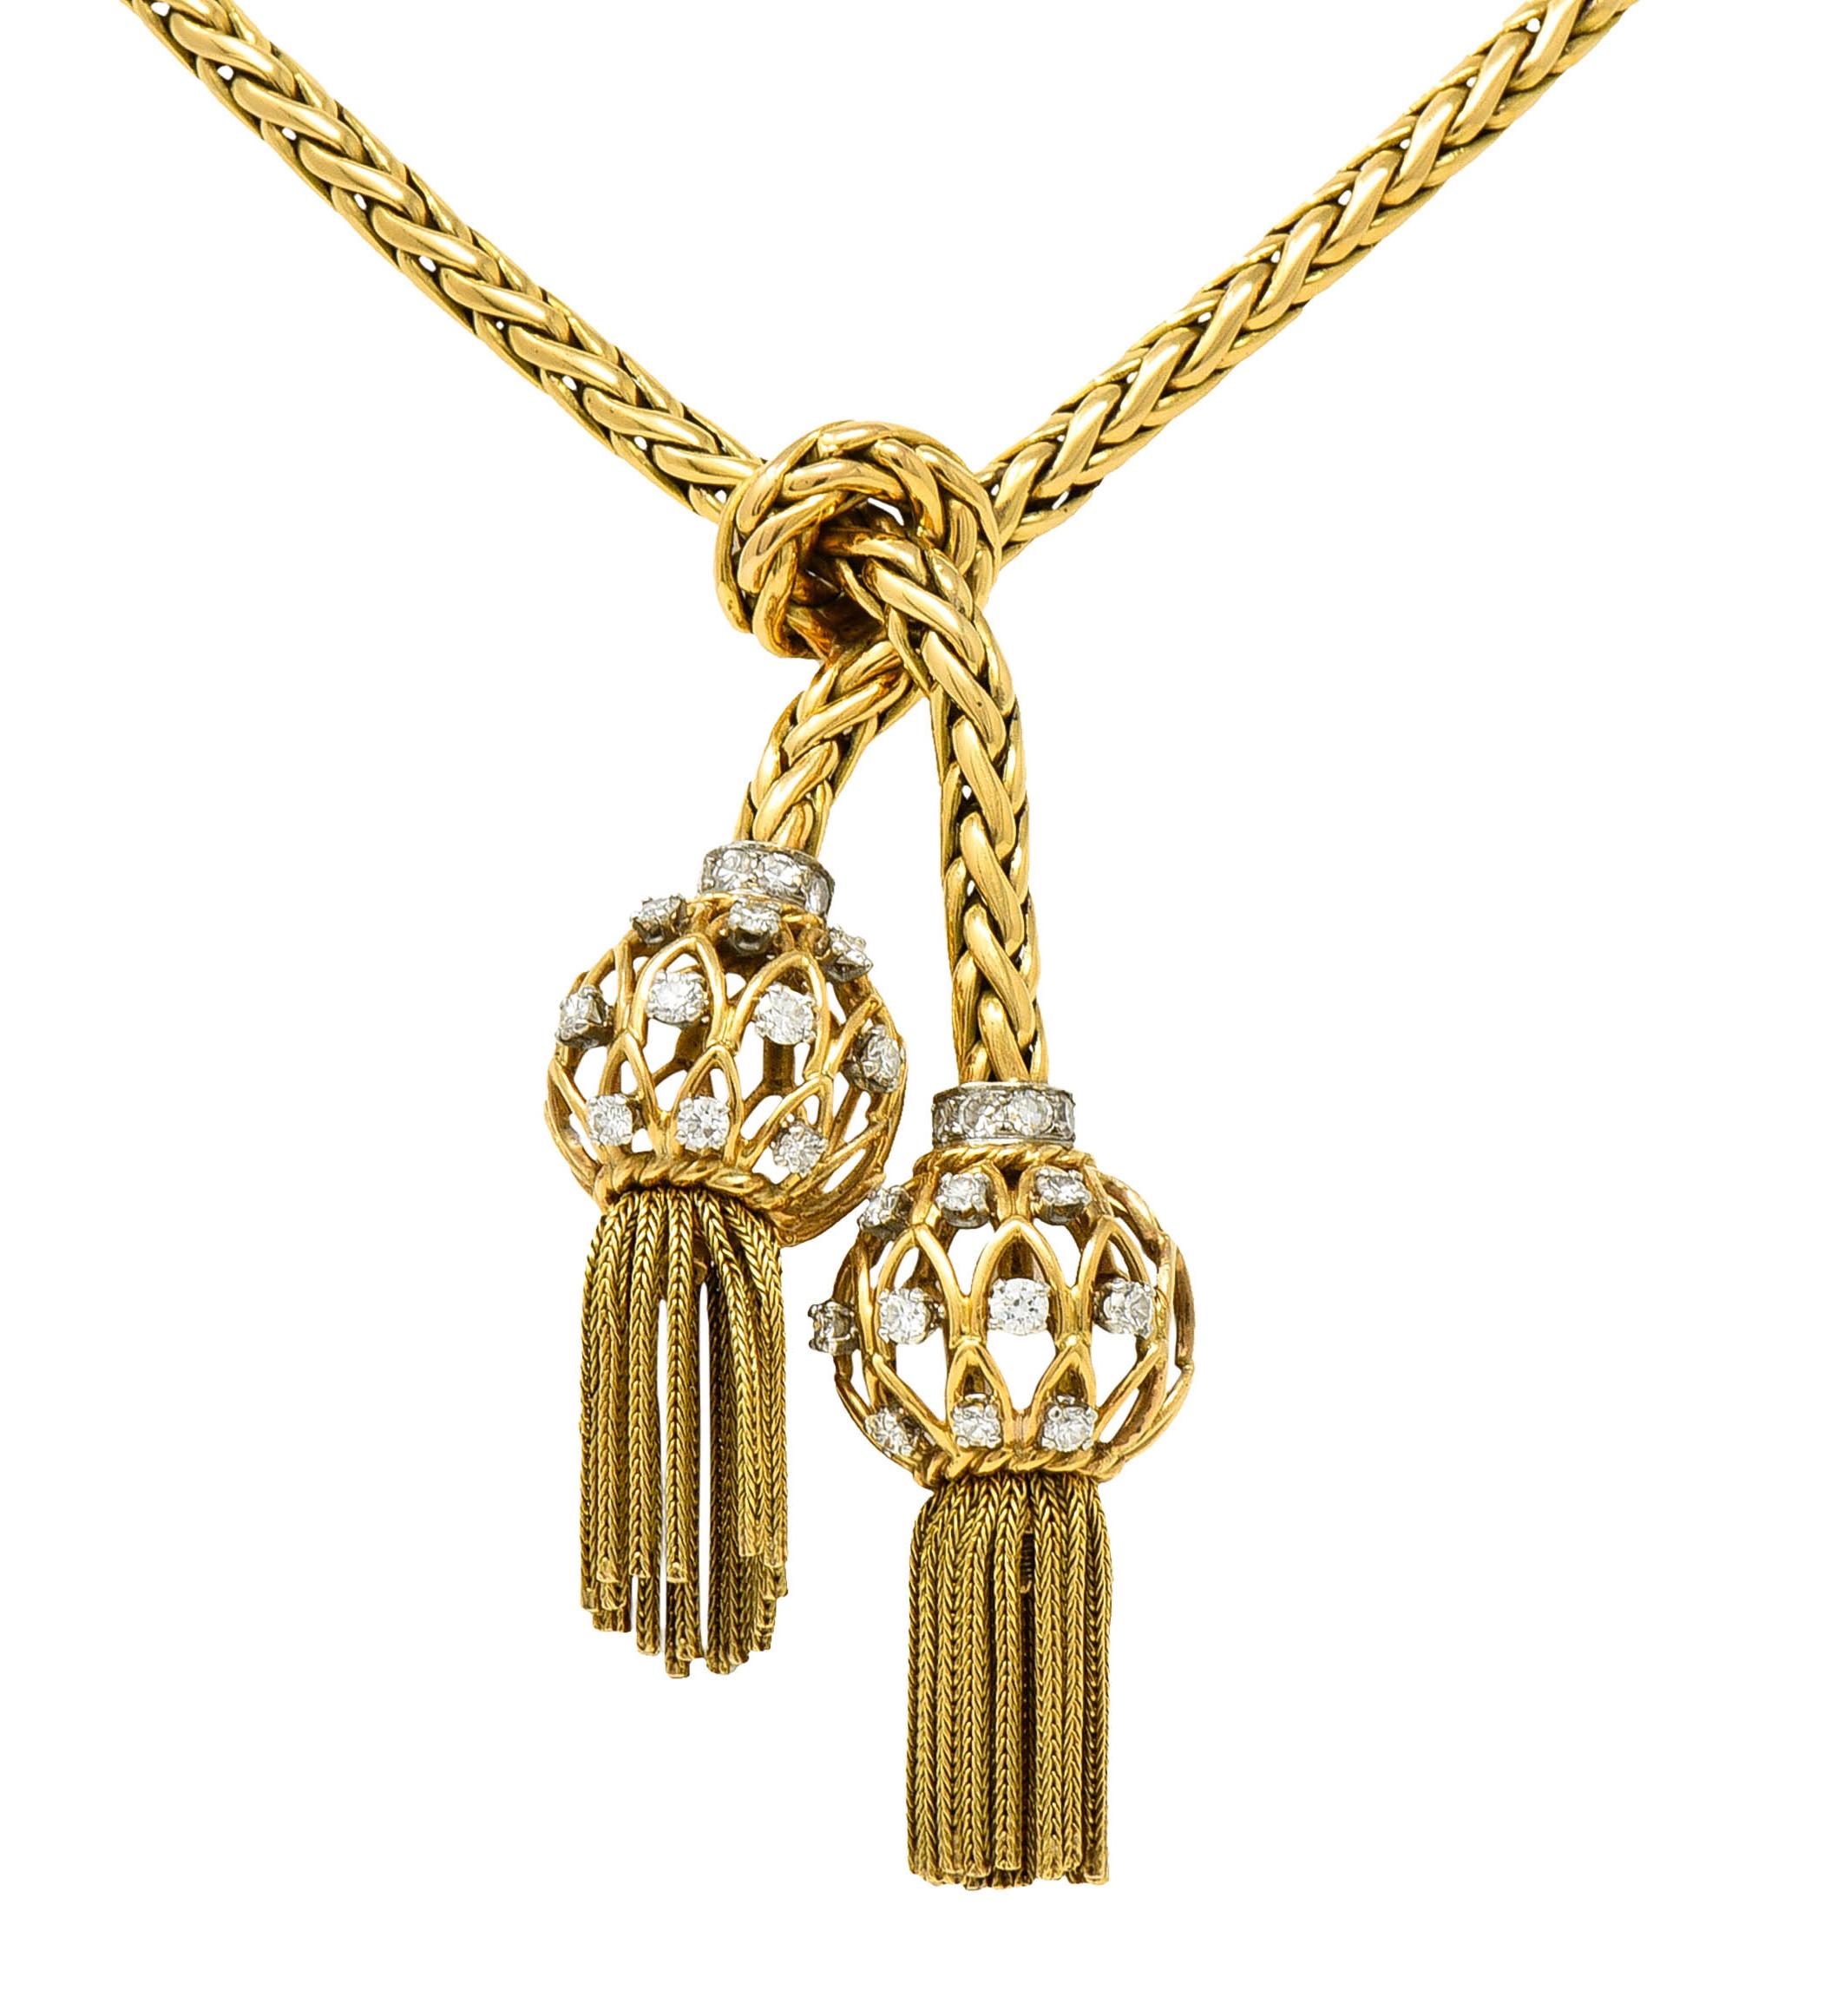 Designed as a woven rope style necklace, knotted, and terminating in open wire orbs with tassels

Orbs are set with single and full cut diamonds, weighing approximately 1.15 carats total, G/H color and VS to SI clarity

With a concealed clasp making